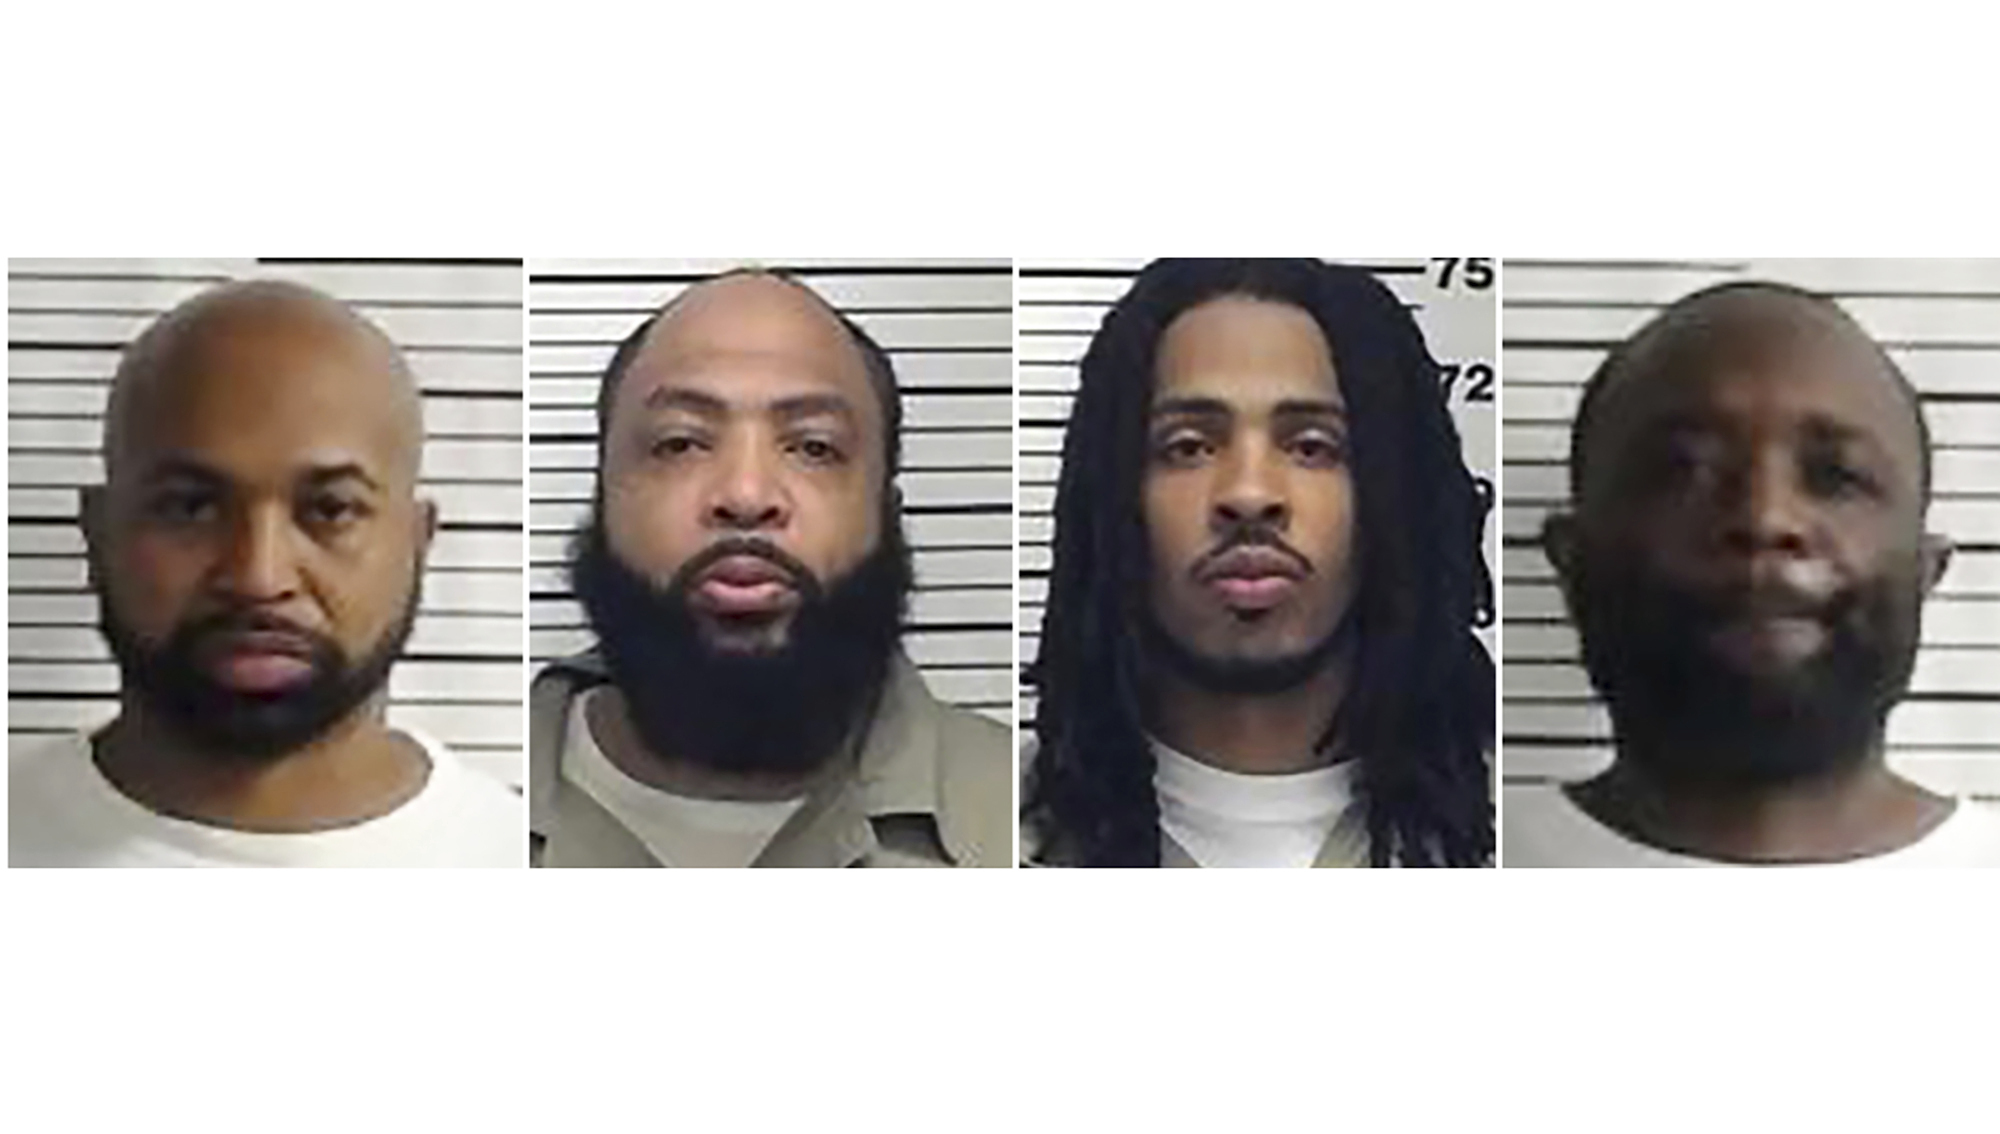 This photo provided by Federal Bureau of Prisons shows from left, Corey Branch, Tavares Lajuane Graham, Lamonte Rashawn Willis and Kareem Allen Shaw. Federal officials say four inmates have escaped from a federal prison’s satellite camp in Virginia. The Federal Bureau of Prisons says inmates Corey Branch, Tavares Lajuane Graham, Lamonte Rashawn Willis and Kareem Allen Shaw were discovered missing from the Federal Correctional Complex Petersburg’s satellite camp in Hopewell, Va., Saturday, June 18, 2022. (Federal Bureau of Prisons via AP)